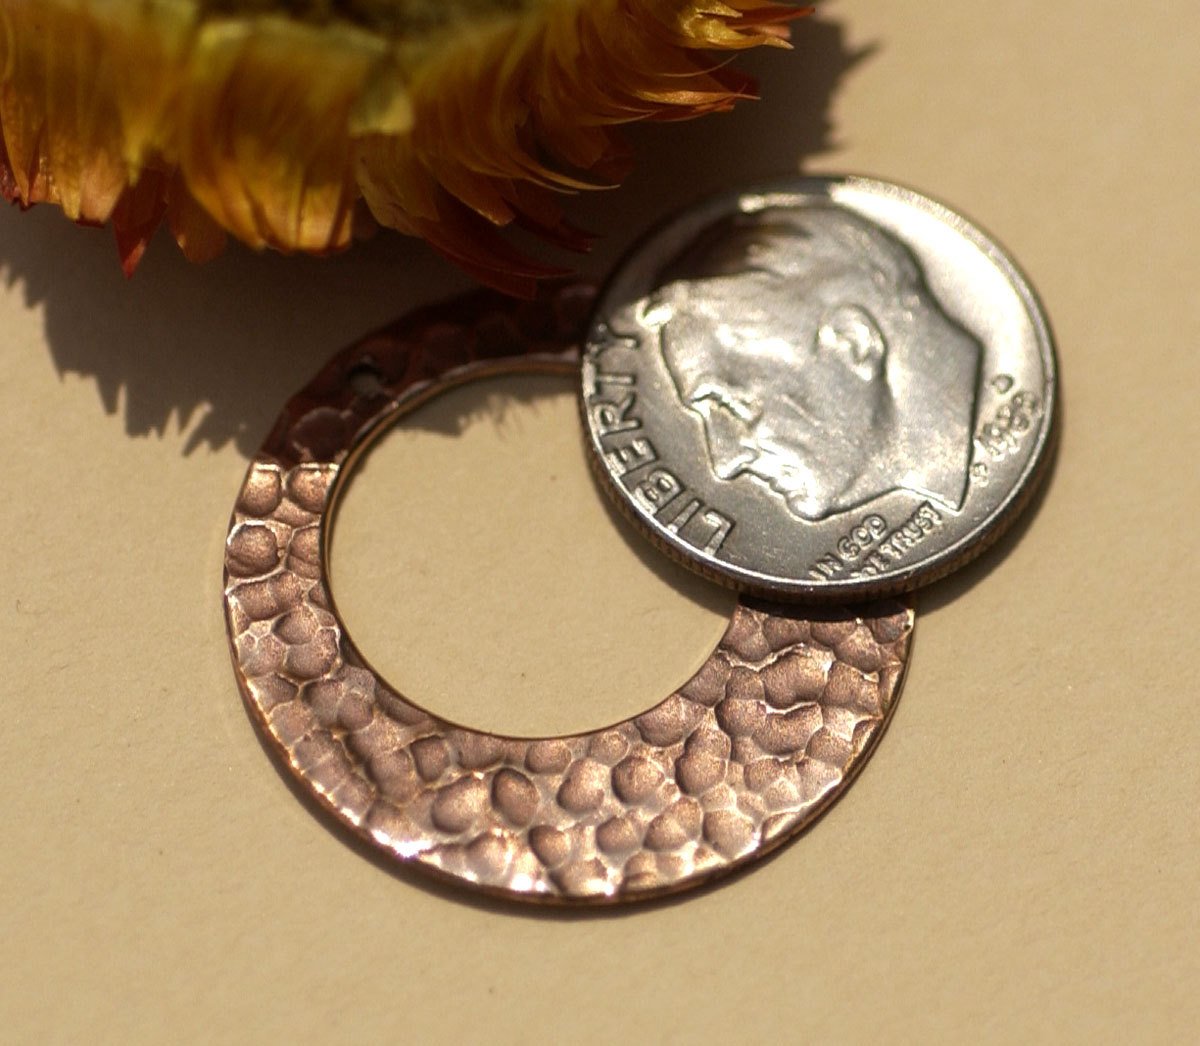 Hammered Copper Hoops 25mm Blank for Earrings -Pendant Offset Circle for Enameling Stamping Texturing Charms, Jewelry Supplies - 4 Pieces